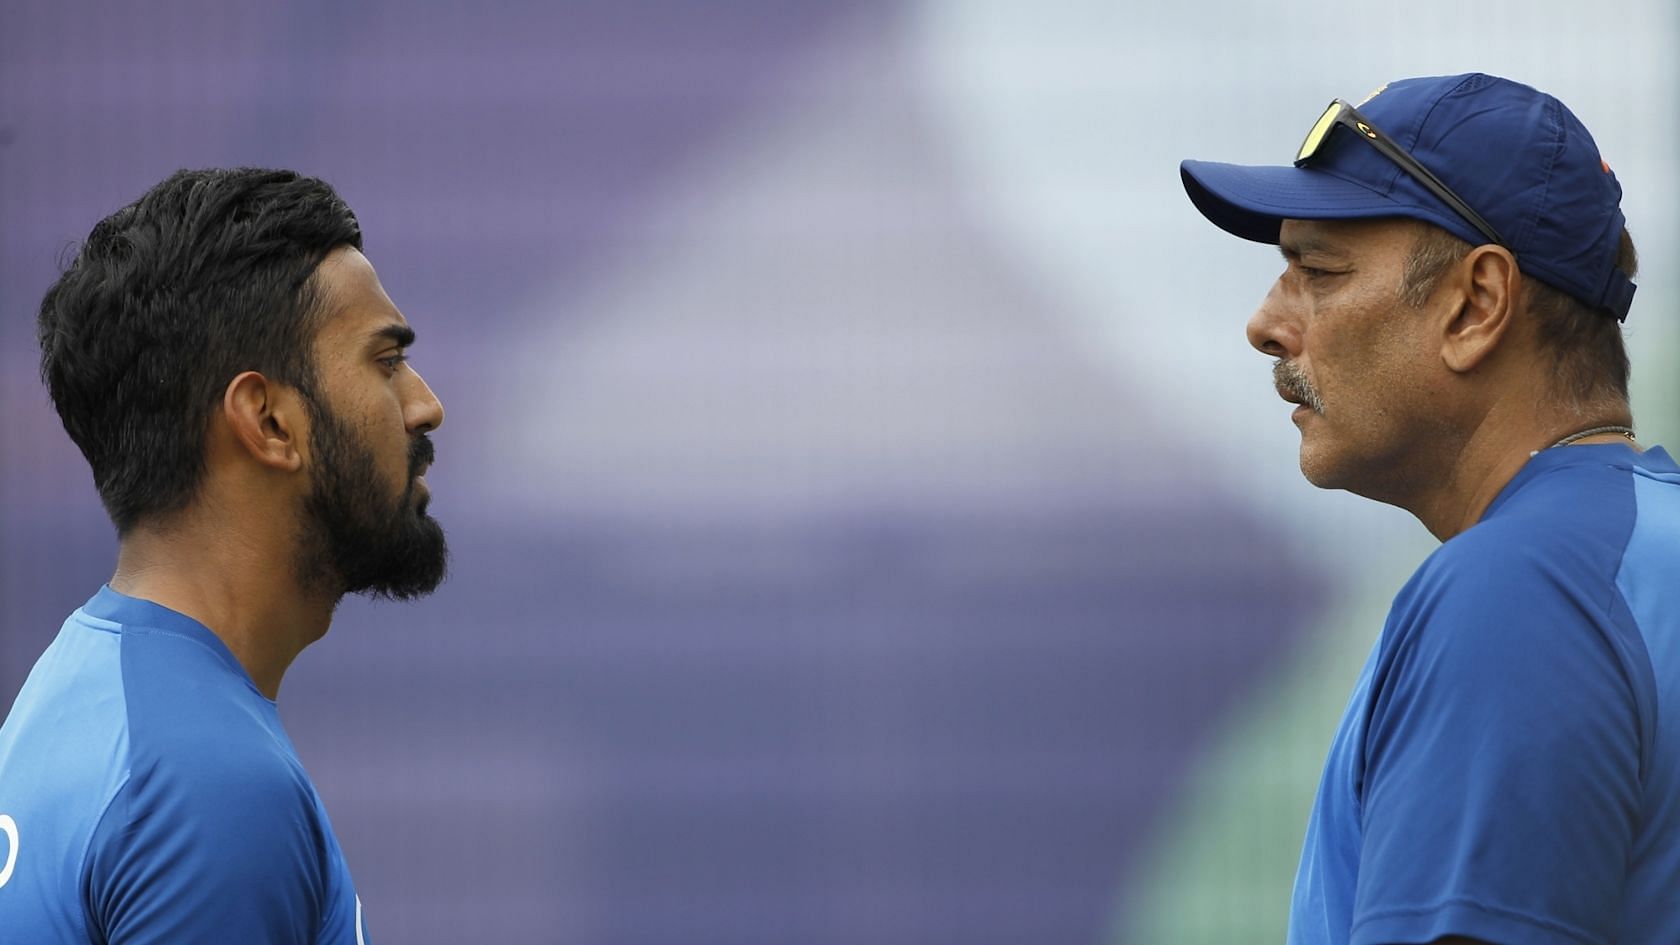 KL Rahul will be returning home to India after injuring his wrist during a training session.